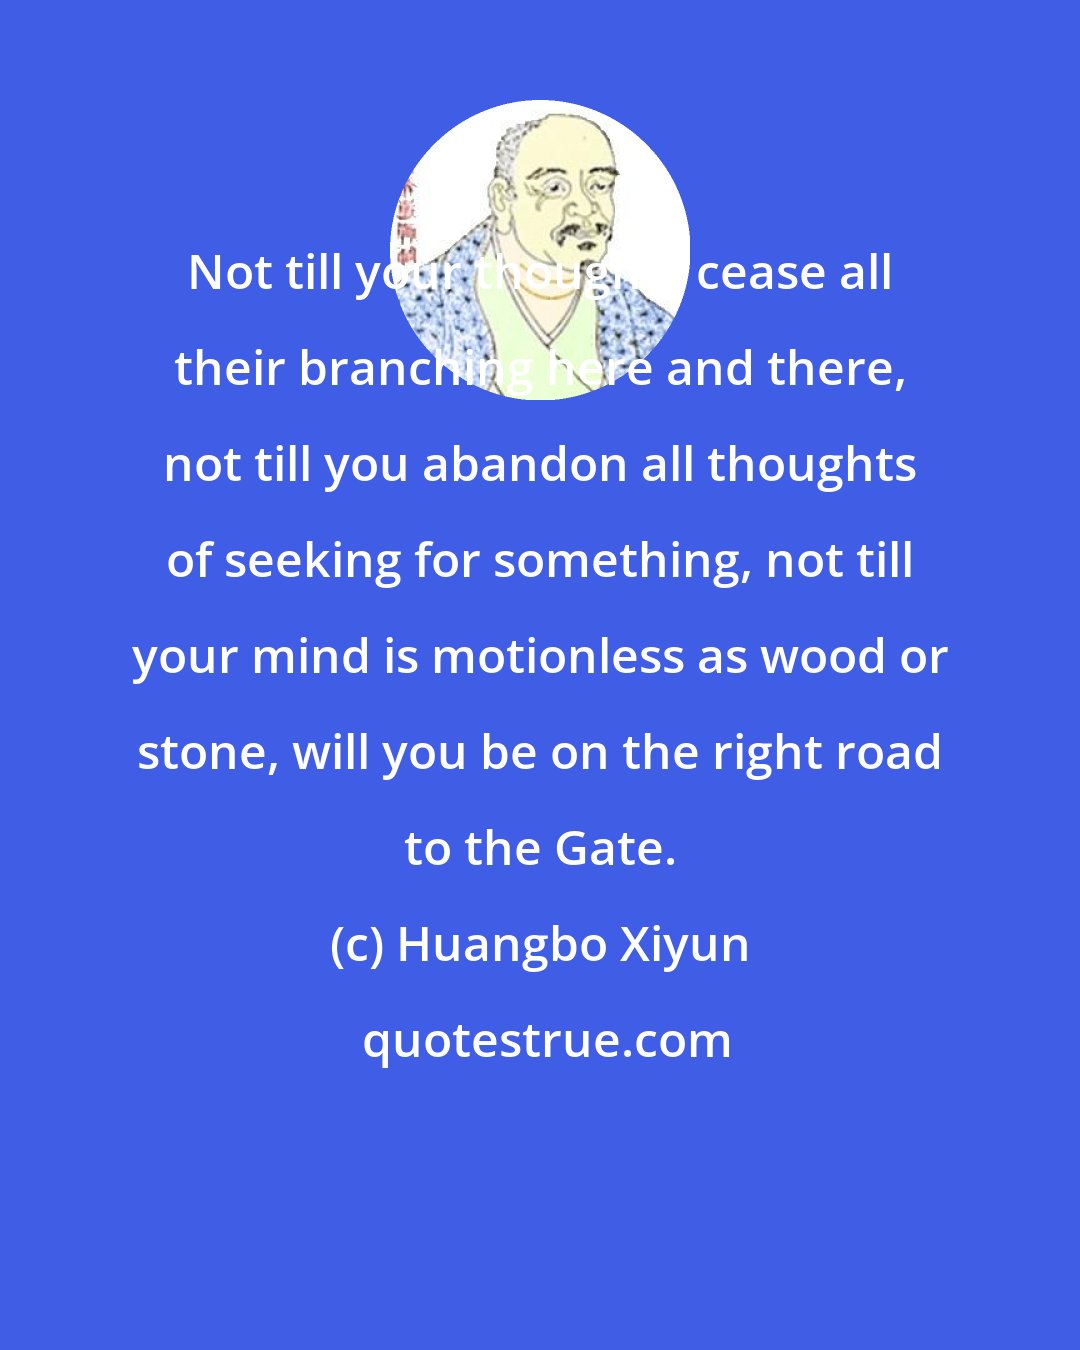 Huangbo Xiyun: Not till your thoughts cease all their branching here and there, not till you abandon all thoughts of seeking for something, not till your mind is motionless as wood or stone, will you be on the right road to the Gate.